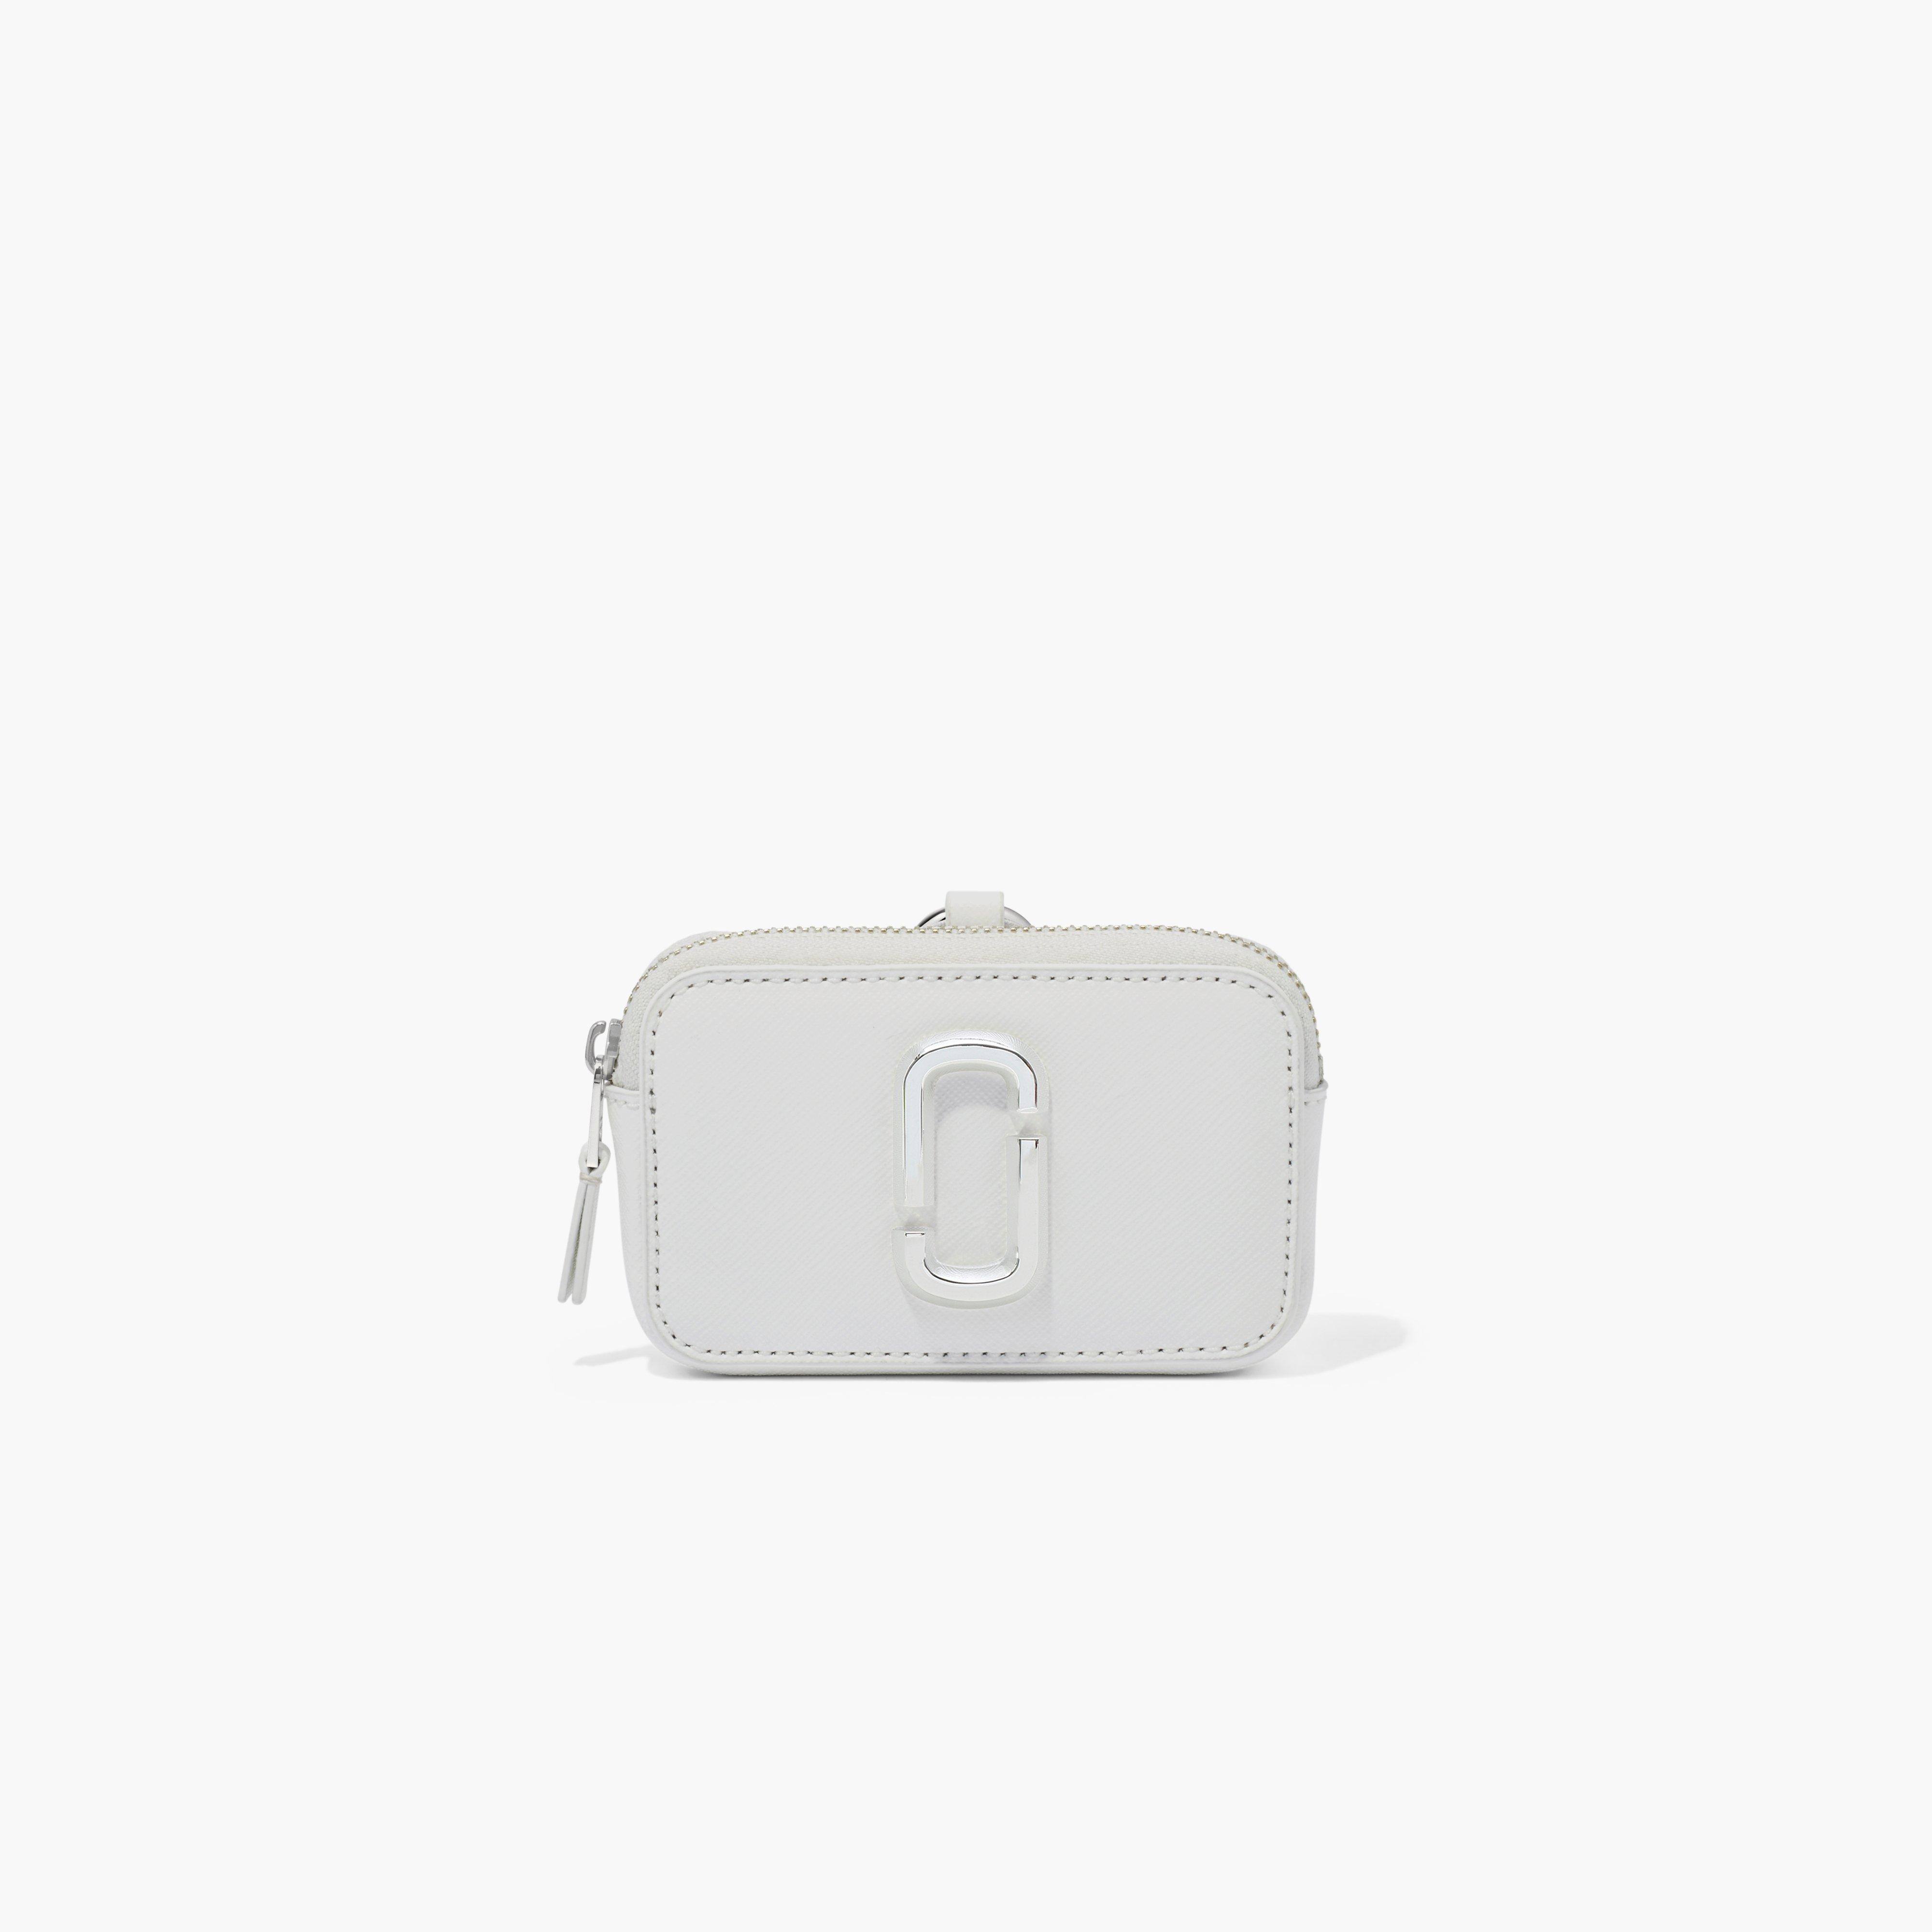 Marc by Marc jacobs The Nano Snapshot Charm,WHITE